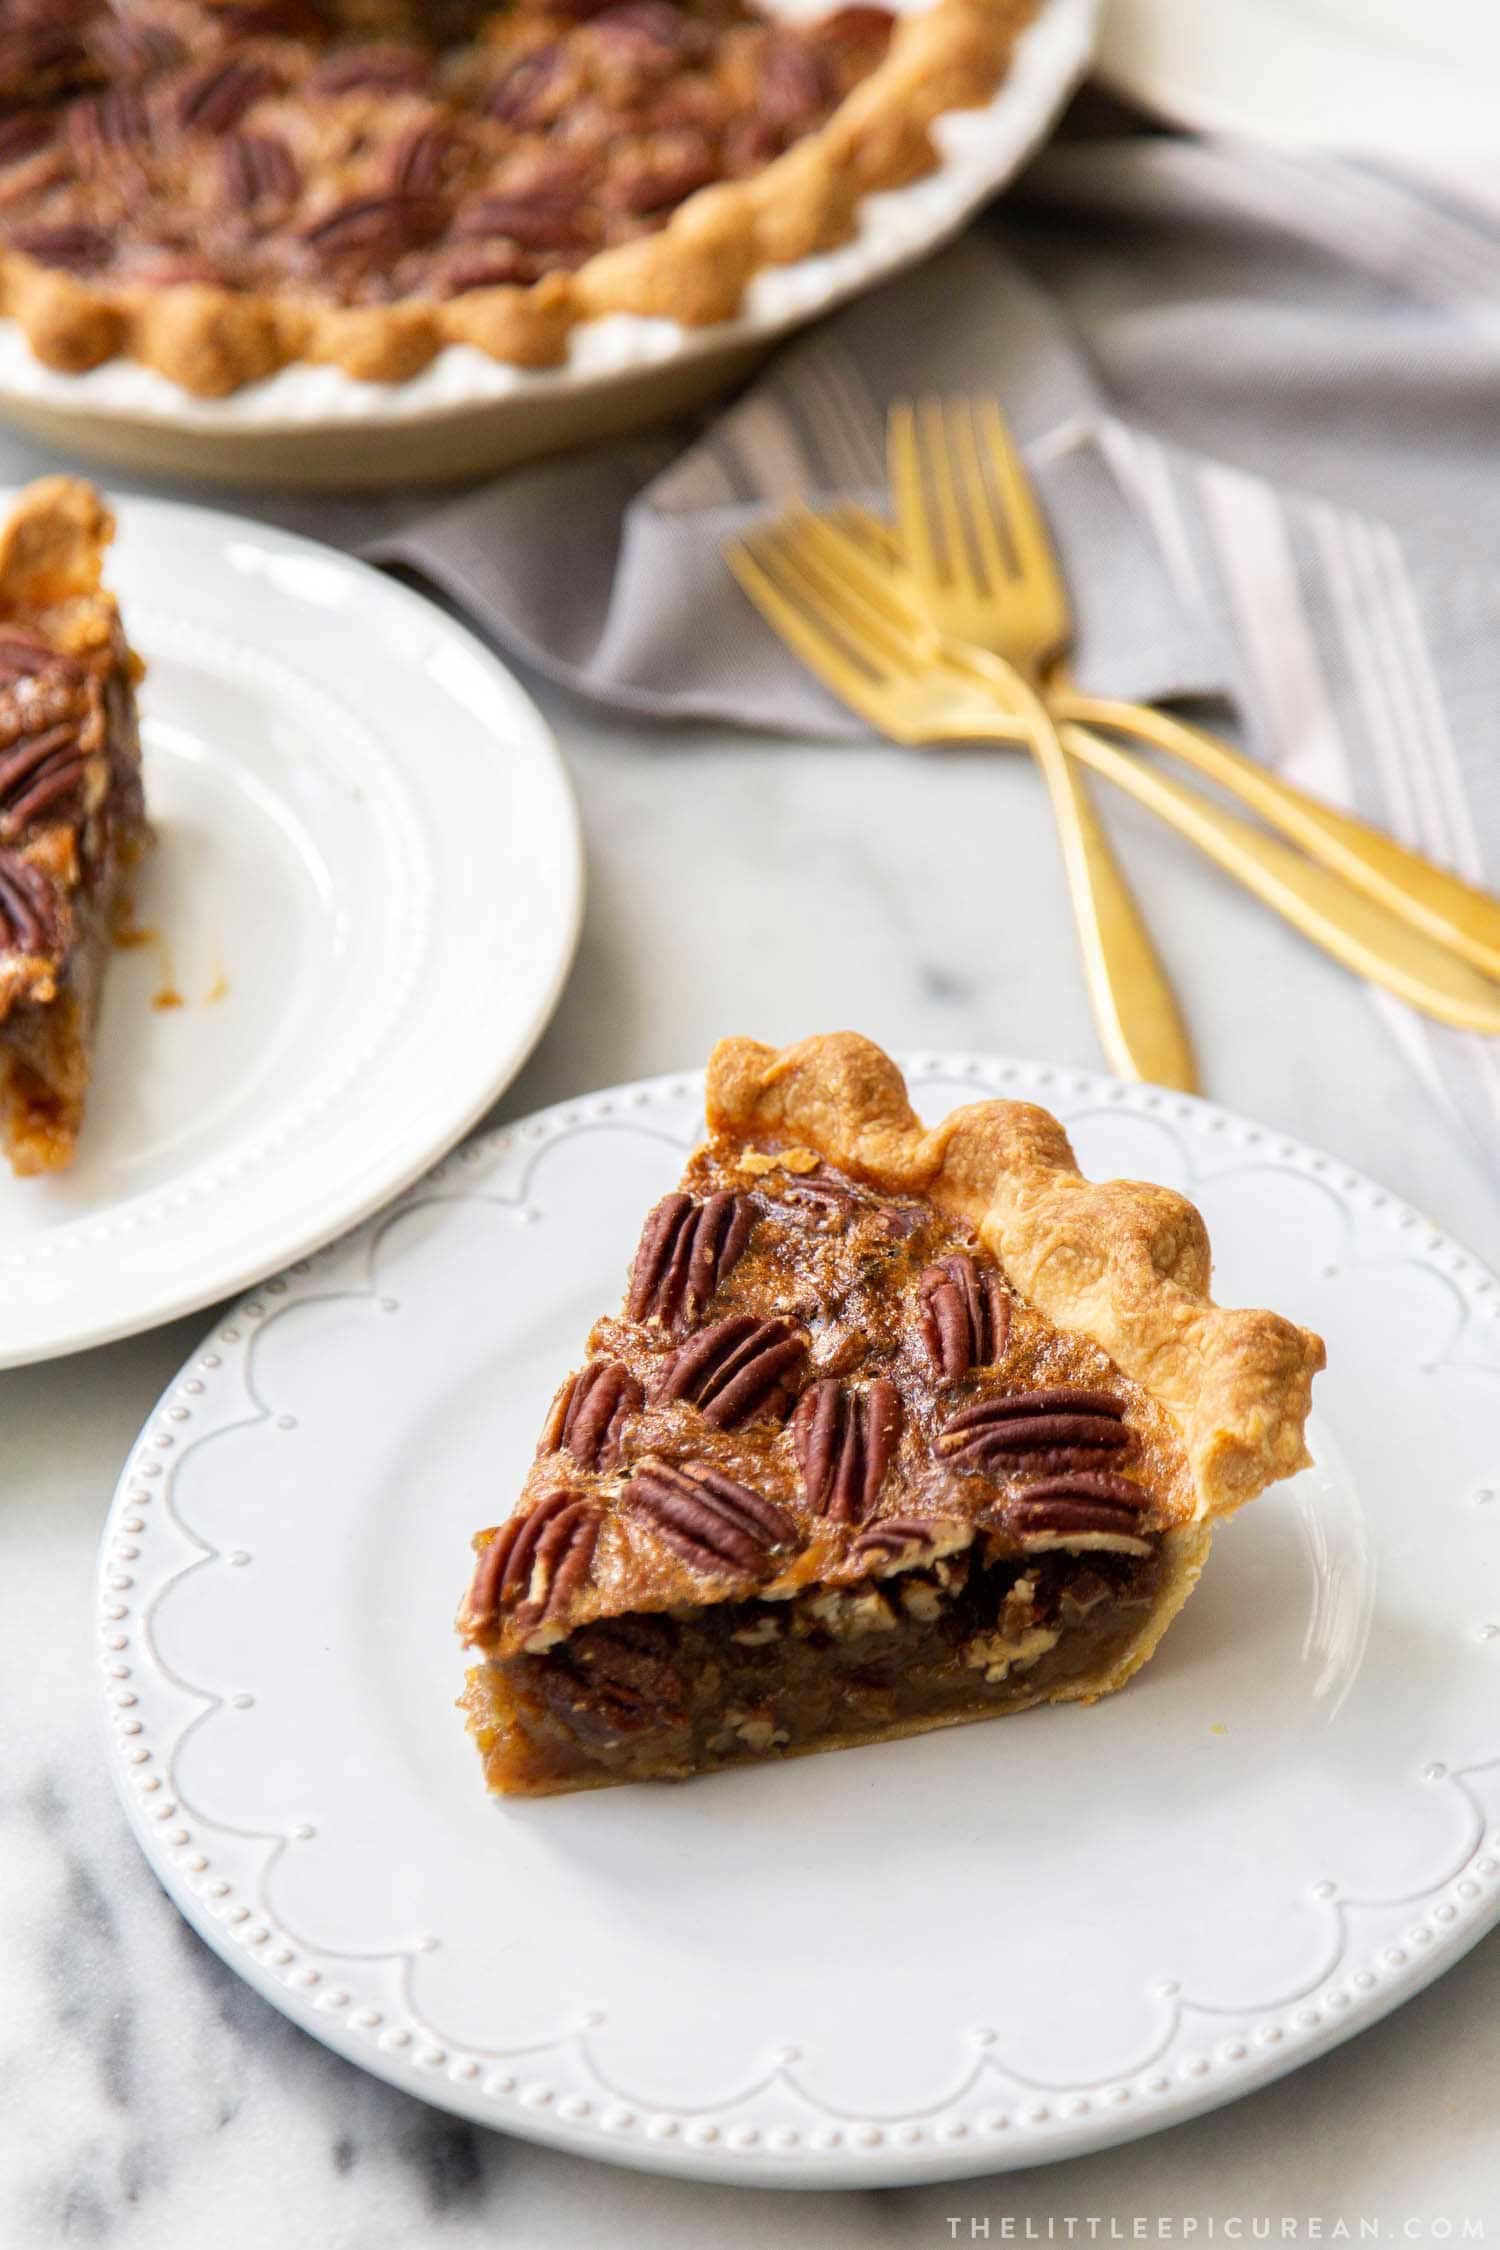 Brown Butter Pecan Pie. Traditional pecan pie with the added warmth and nuttiness of brown butter. This recipe includes a homemade butter pie crust. Perfect for Thanksgiving and beyond! #pecanpie #pie #classicpie #recipe #thanksgiving #holidays #fallbaking